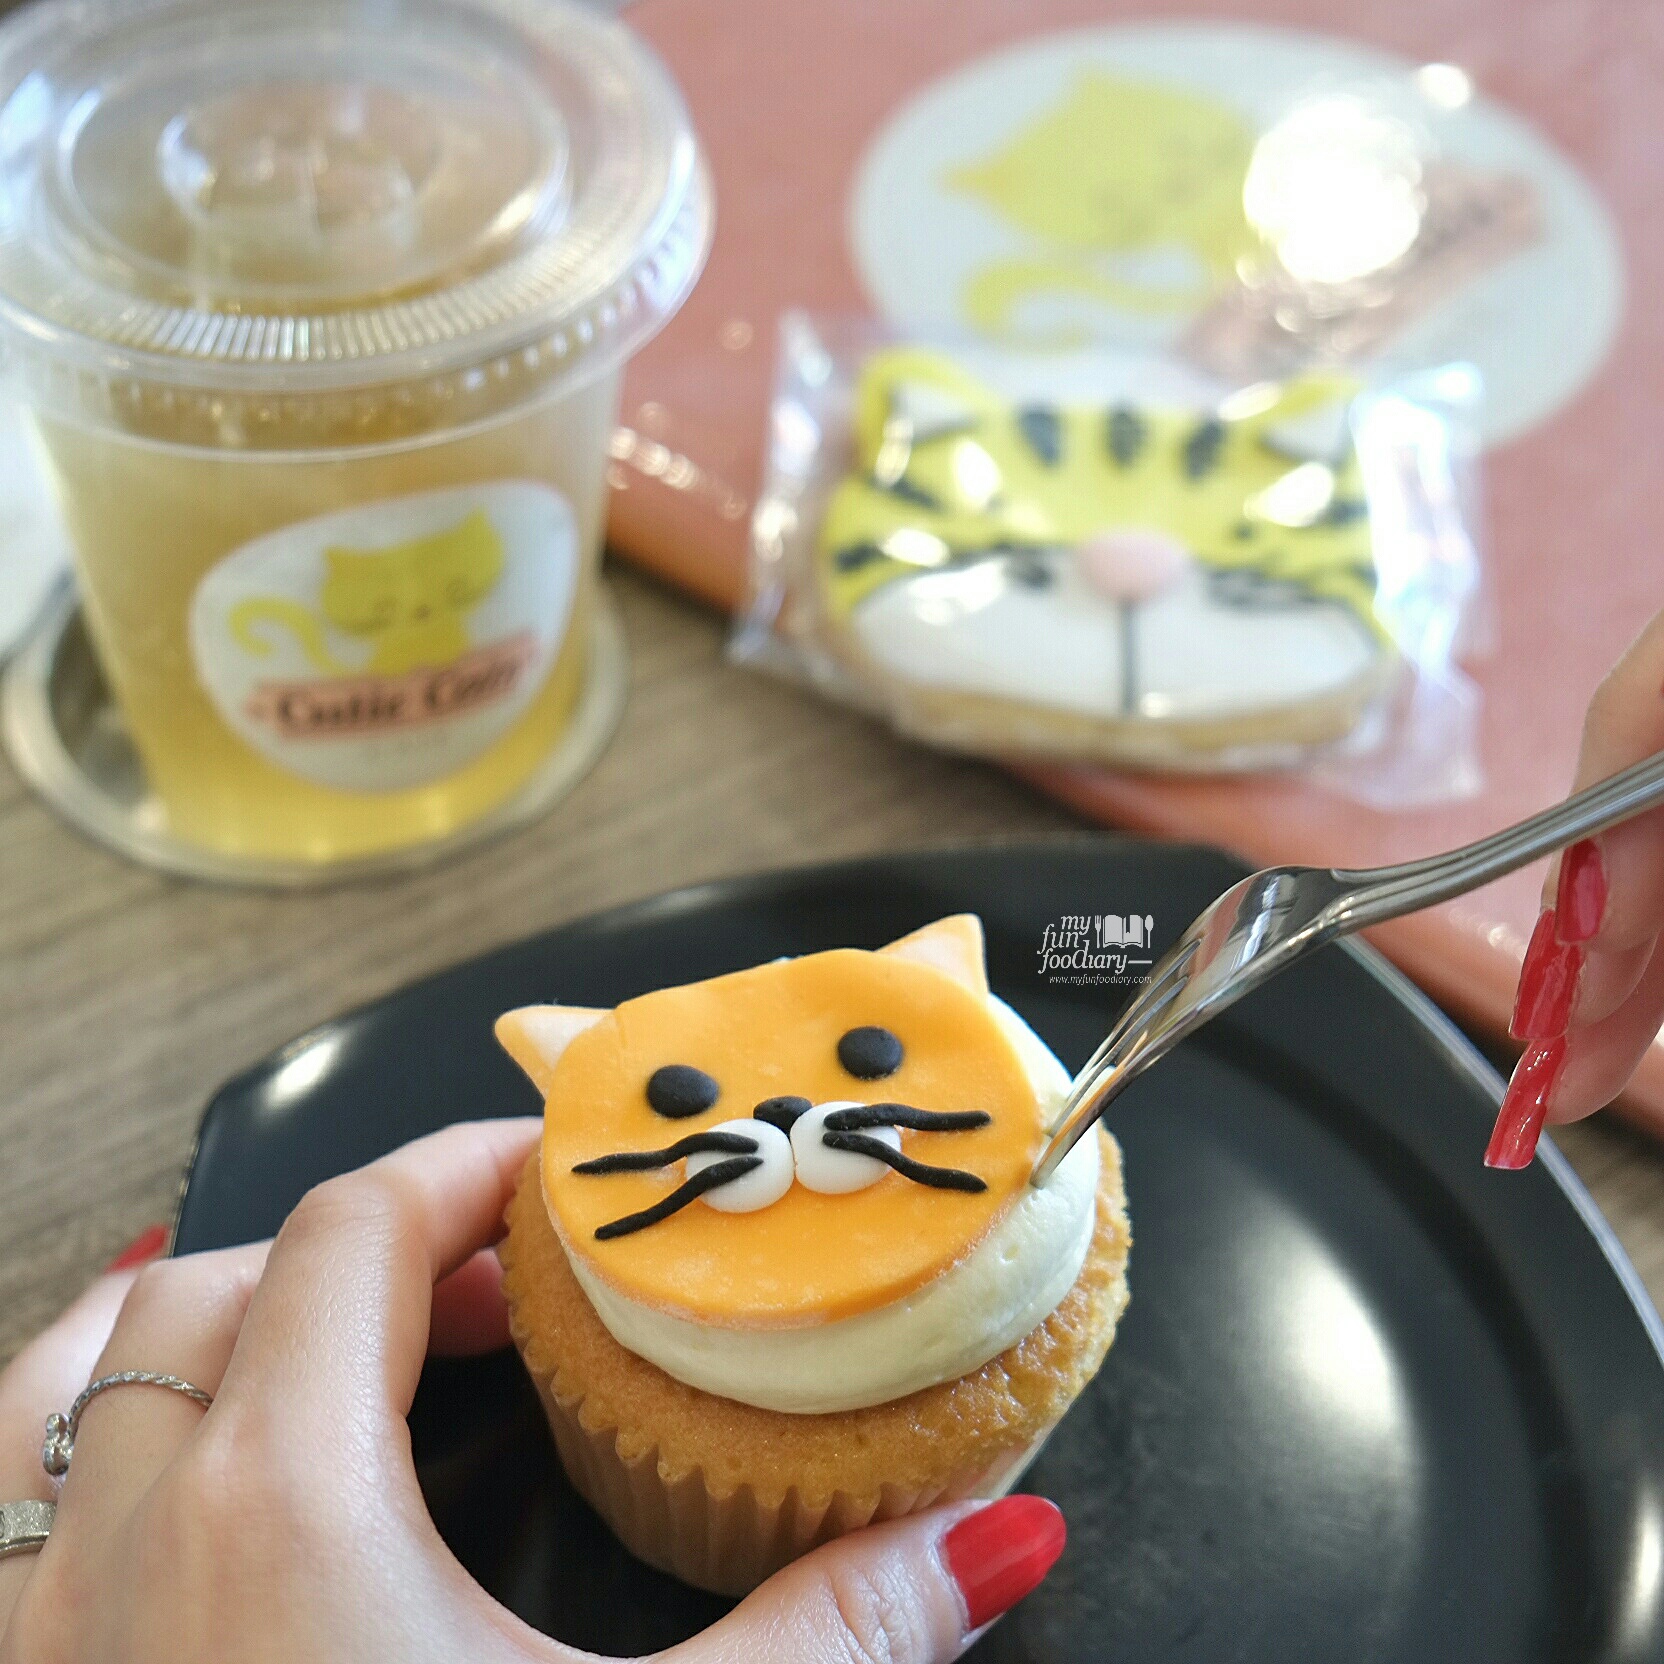 Dessert at Cutie Cats Cafe by Myfunfoodiary